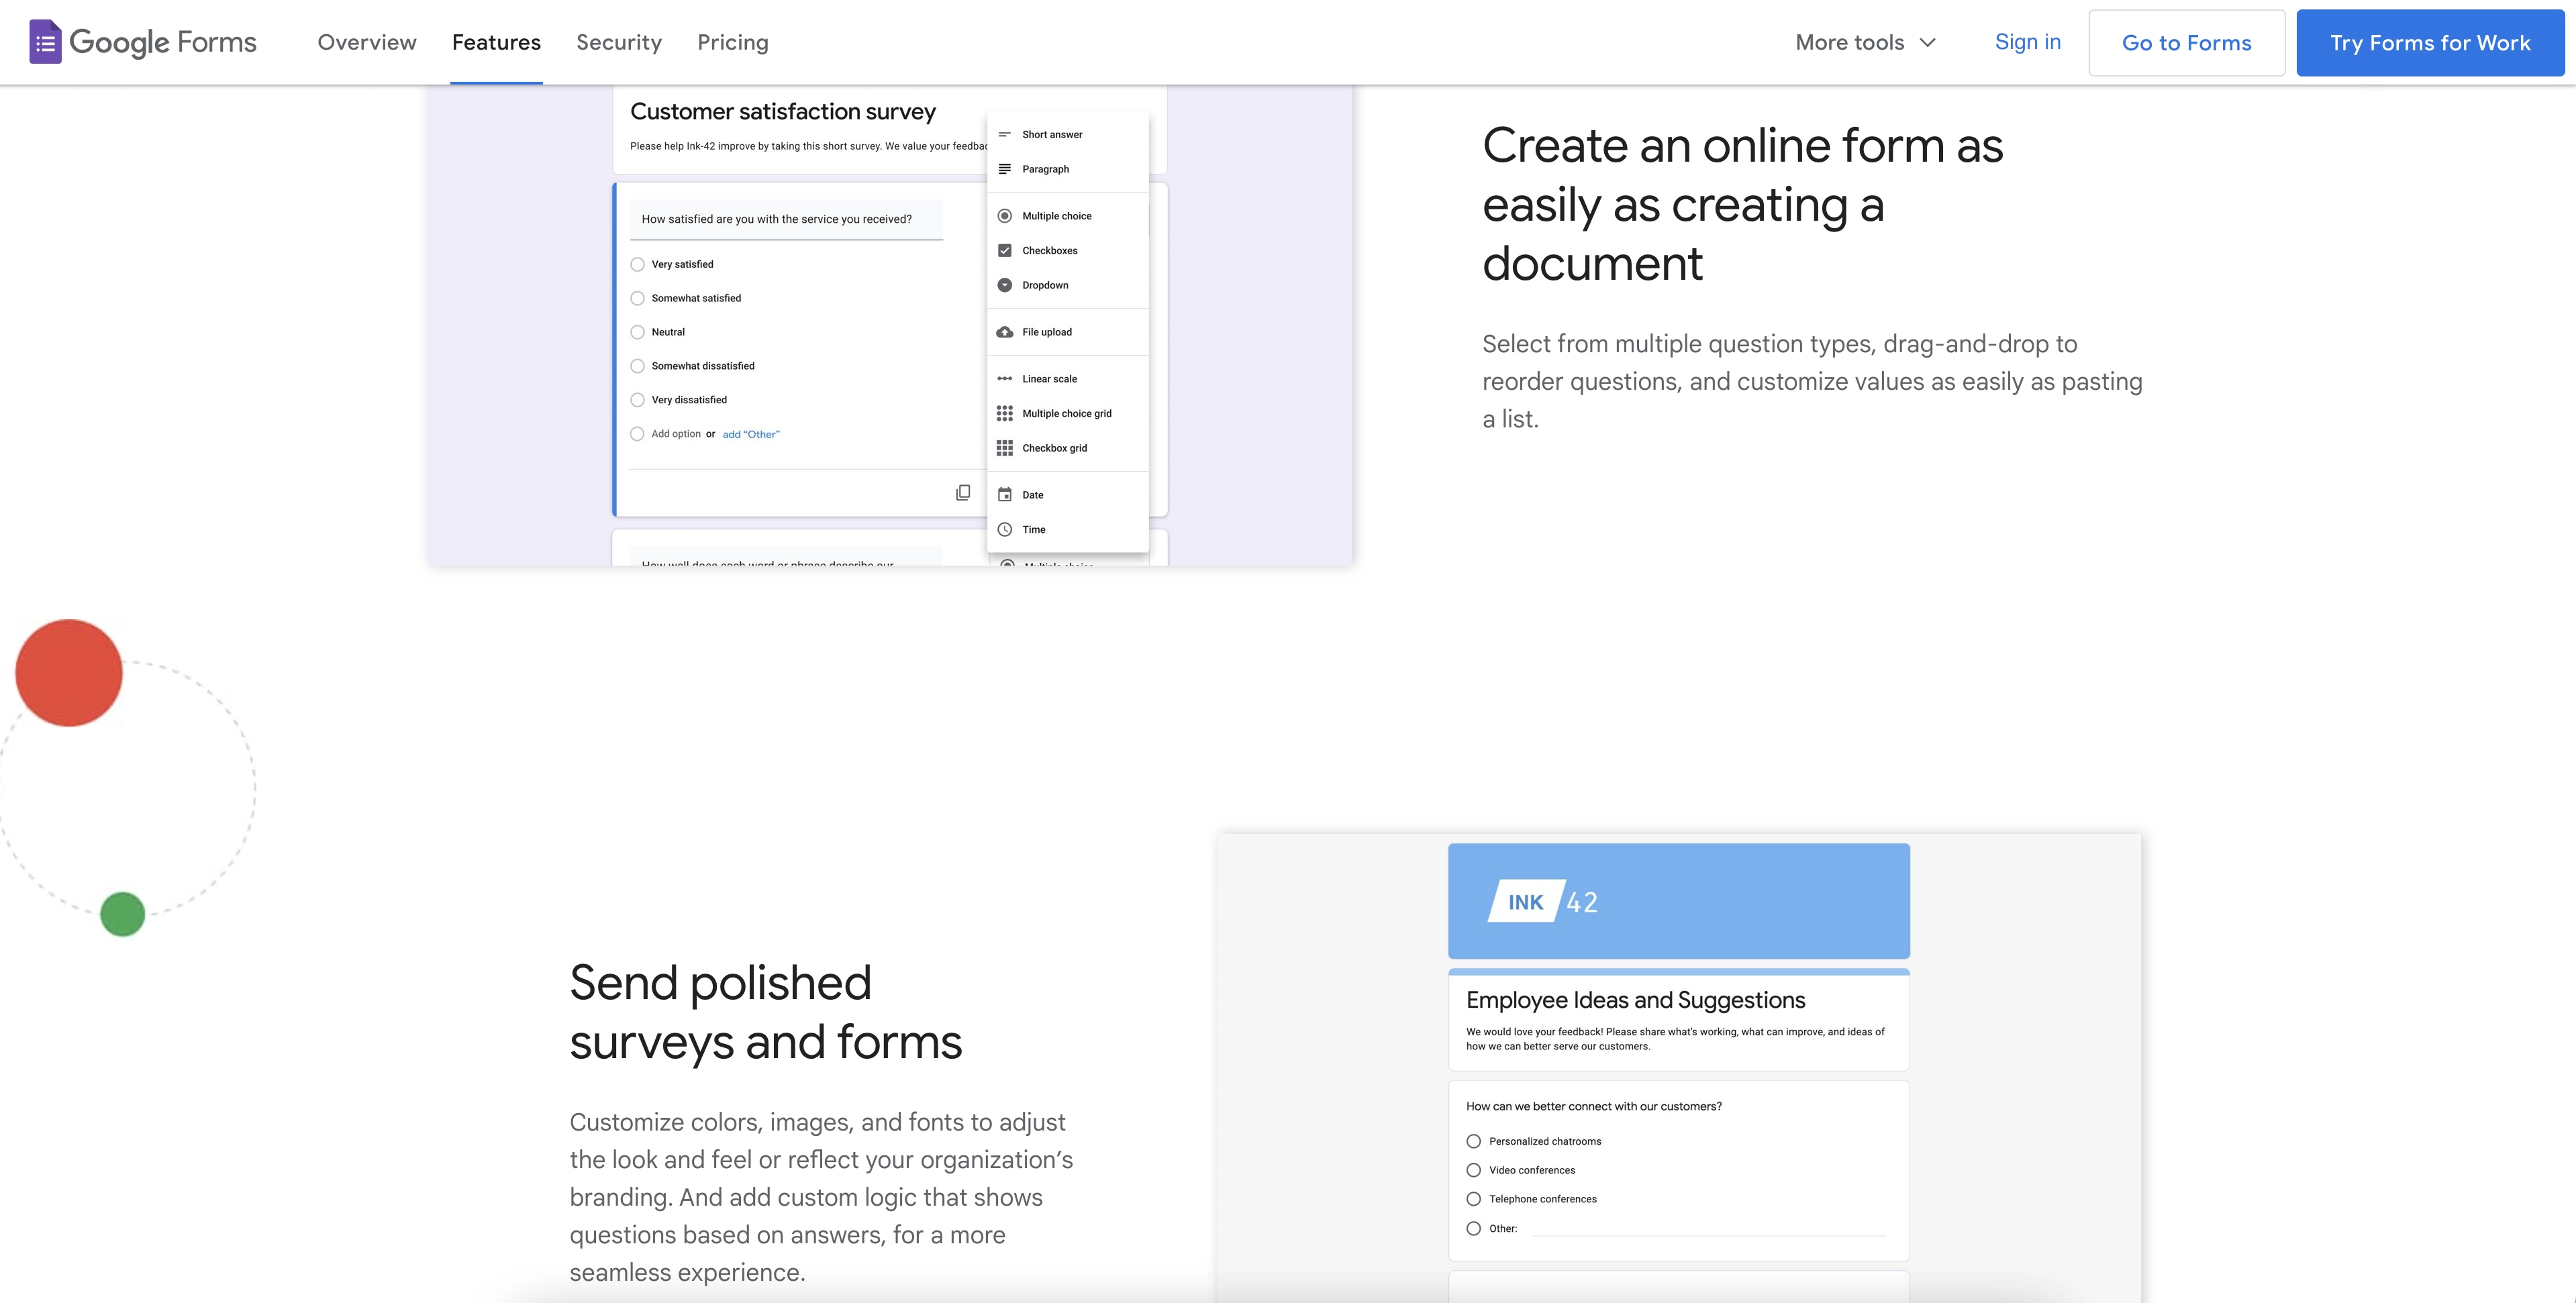 Google Forms Startup Tools